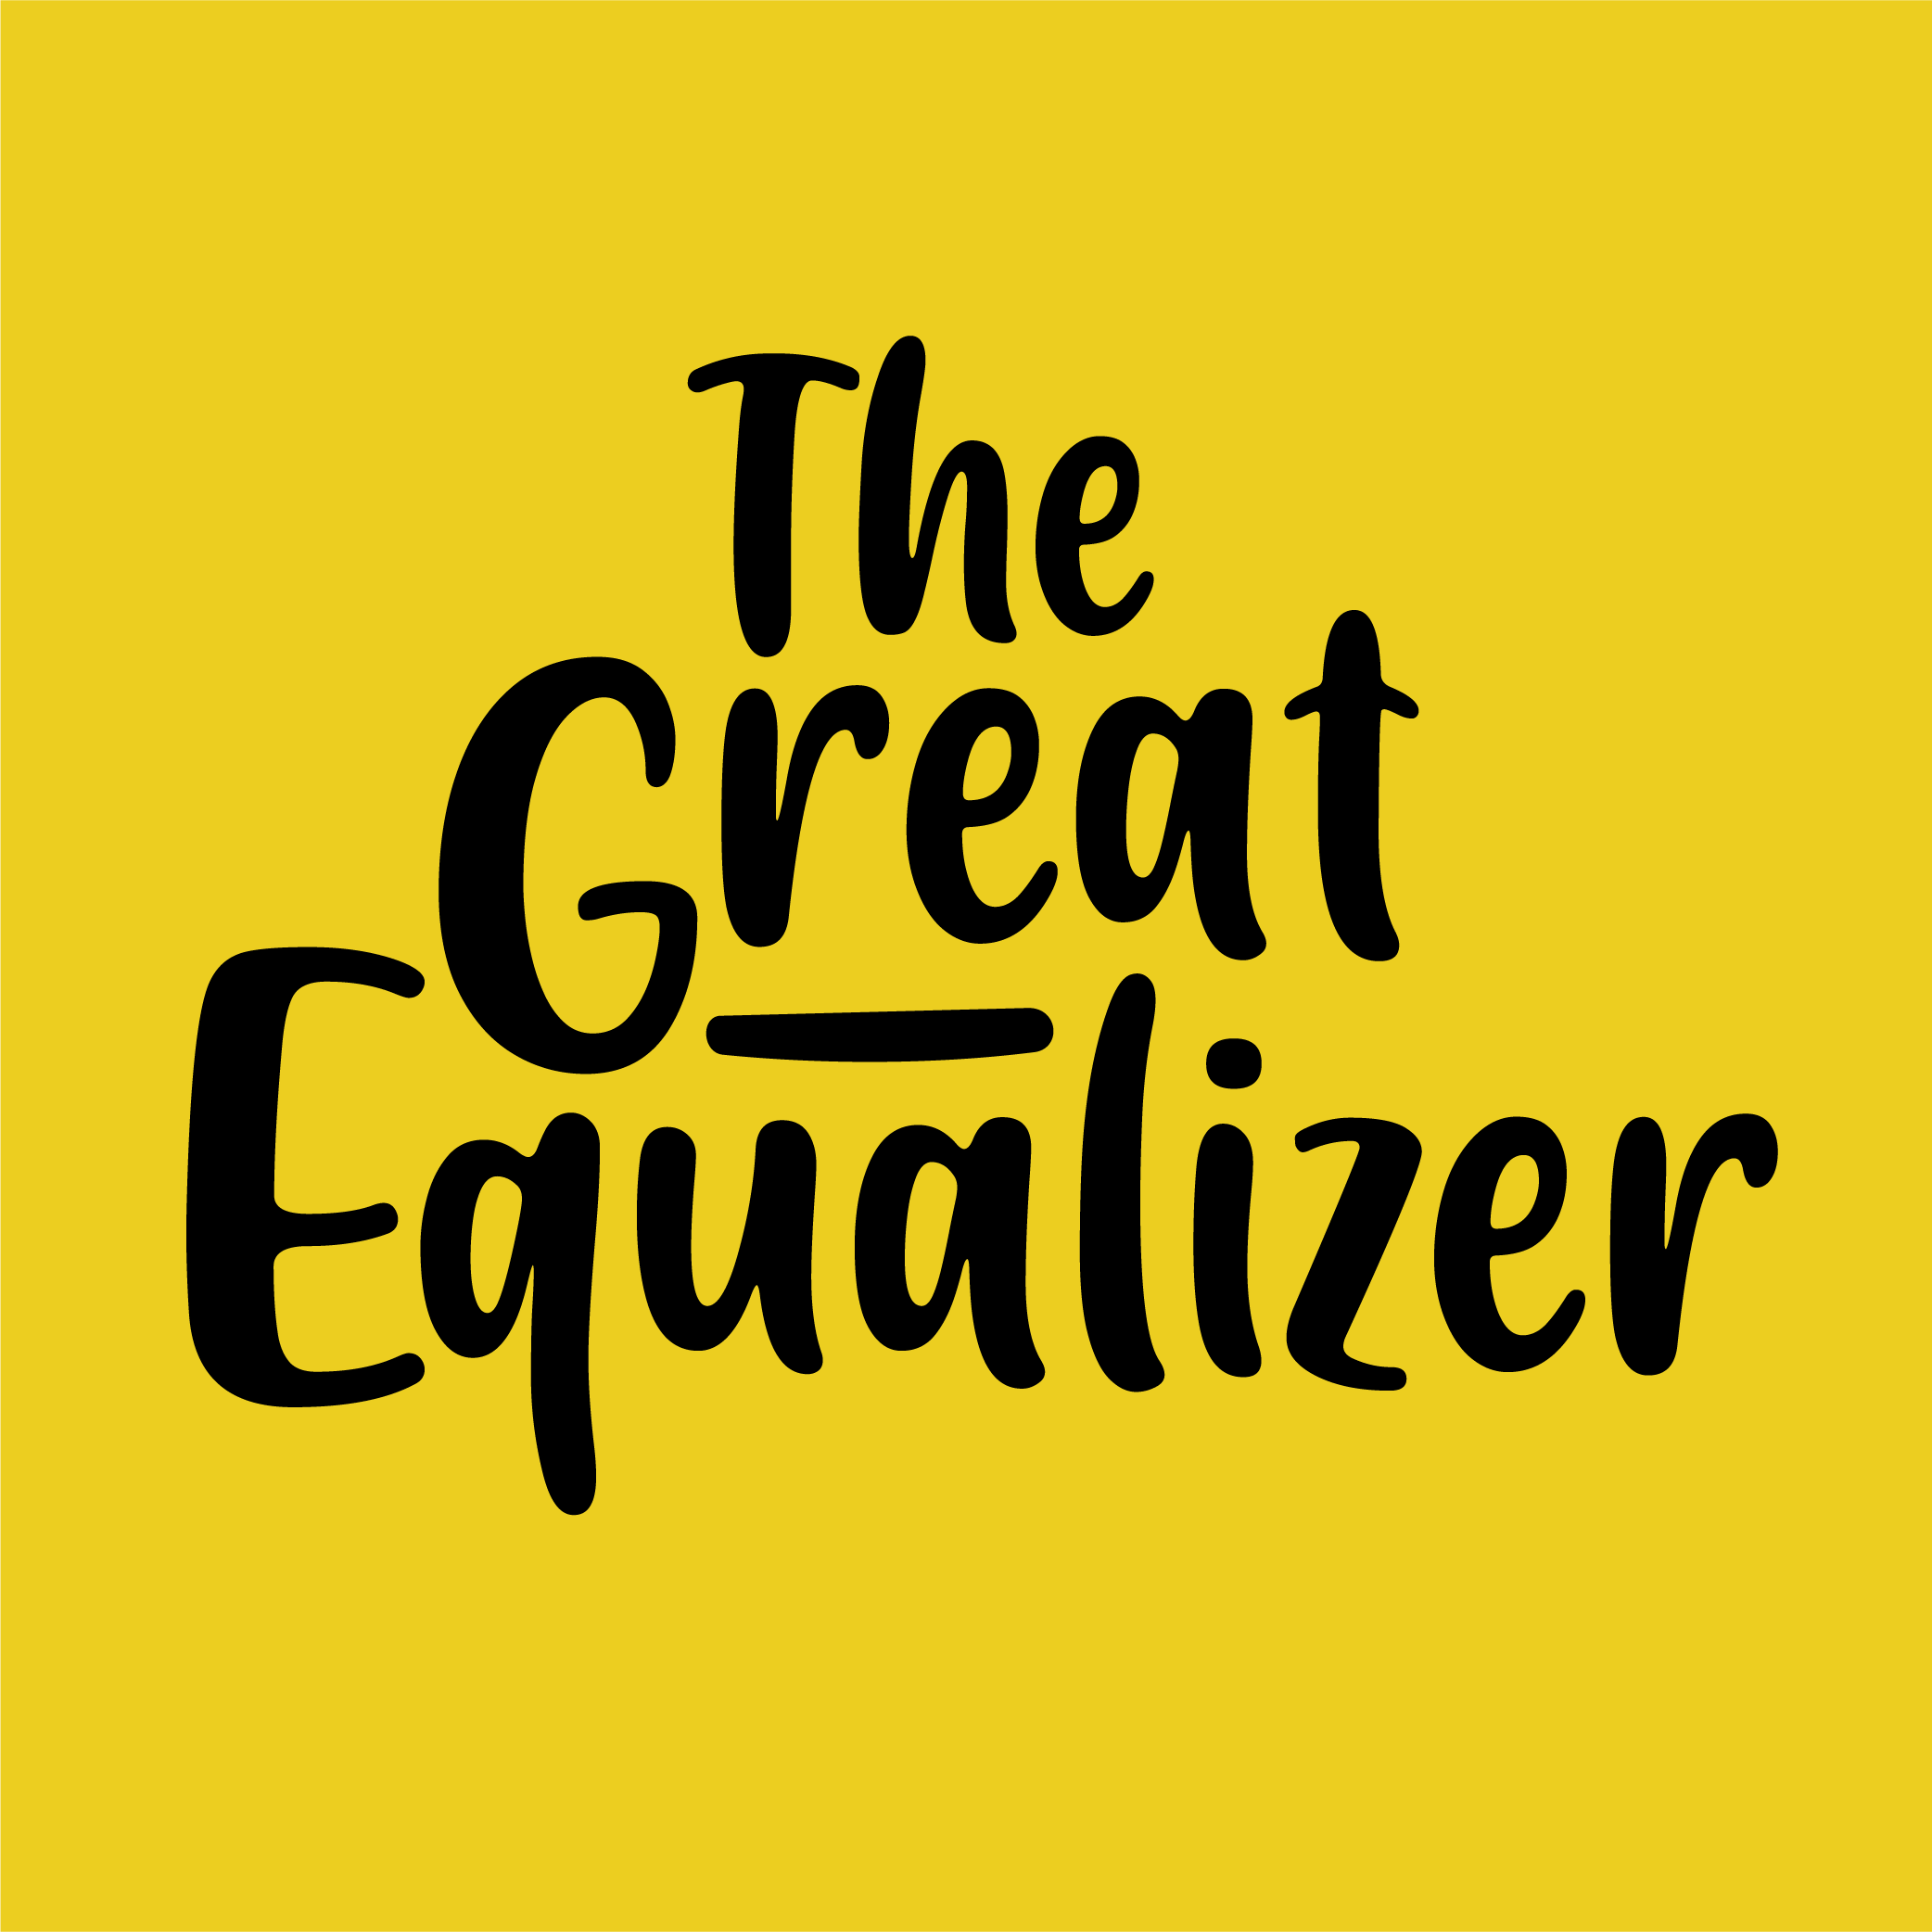 The Great Equalizer